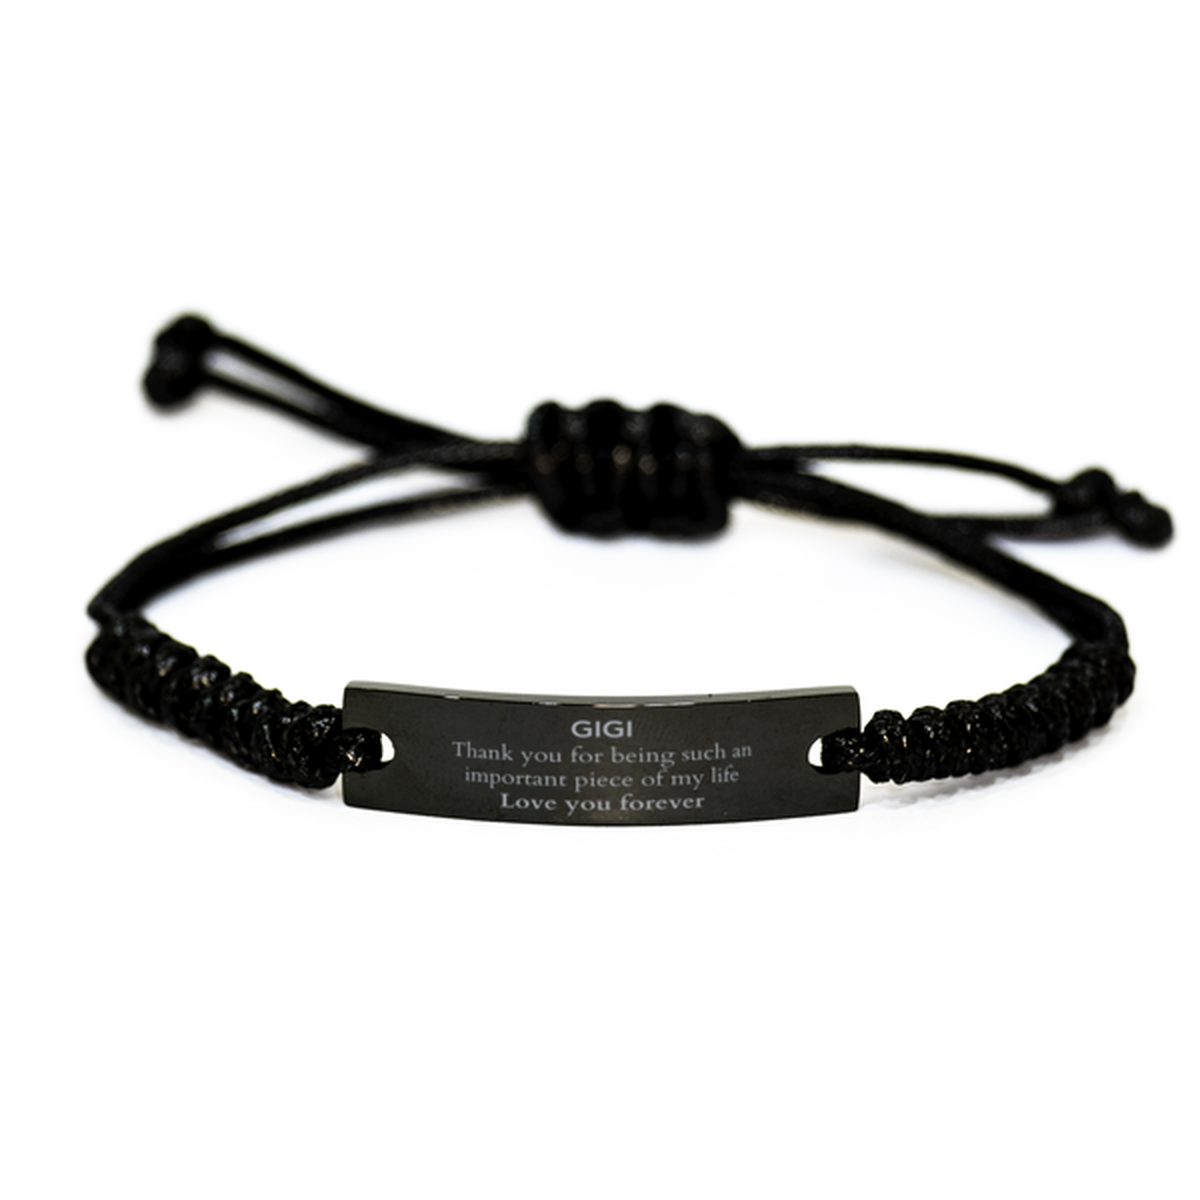 Appropriate Gigi Black Rope Bracelet Epic Birthday Gifts for Gigi Thank you for being such an important piece of my life Gigi Christmas Mothers Fathers Day